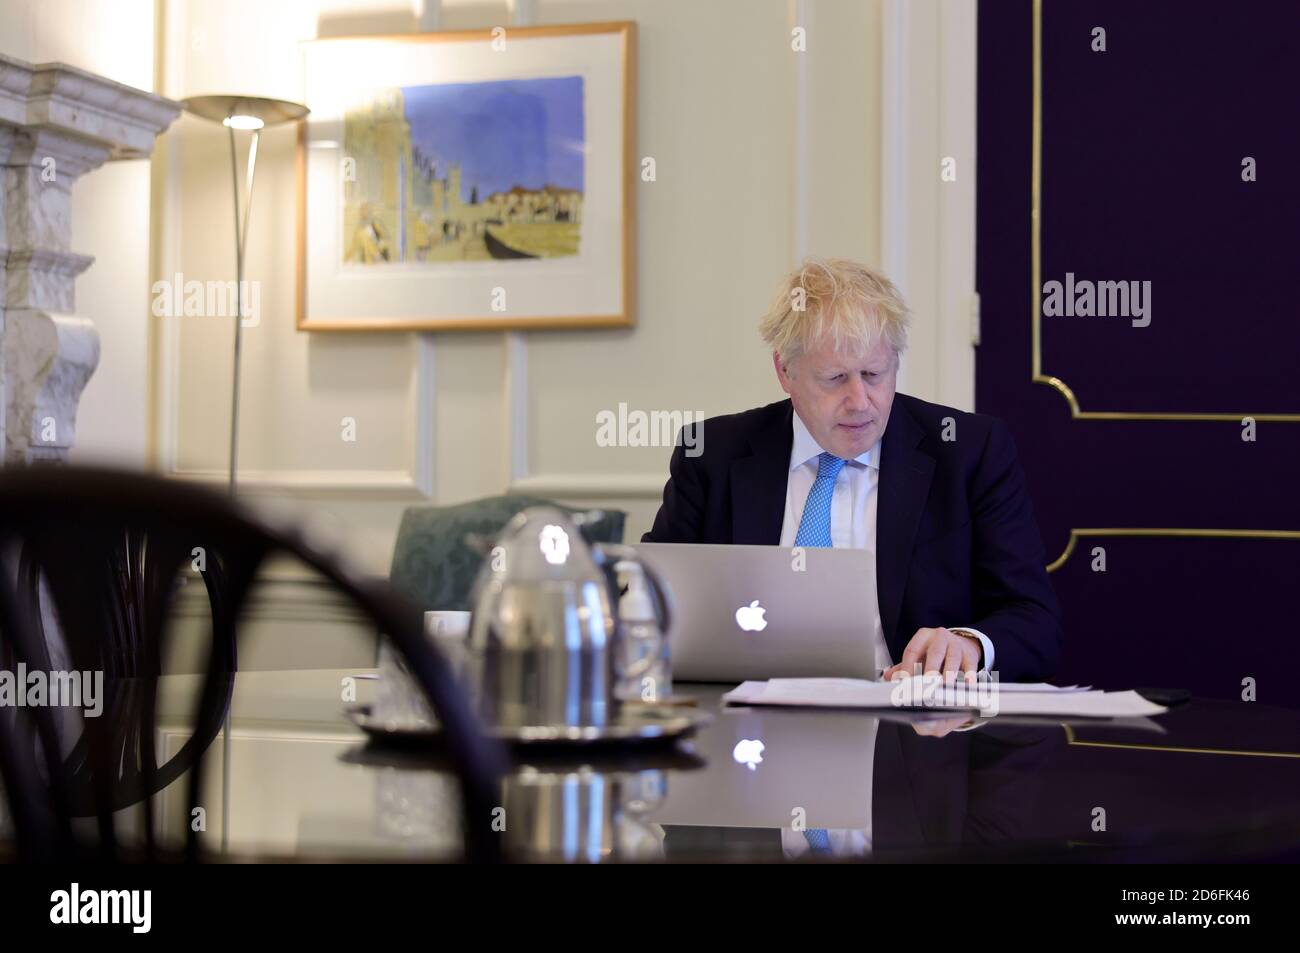 (201017) -- LONDON, Oct. 17, 2020 (Xinhua) -- British Prime Minister Boris Johnson prepares his Brexit statement in his office at 10 Downing Street, before filming a clip to the media on his reaction after the EU Summit, in London, Britain, on Oct. 16, 2020. Boris Johnson said Friday that as the European Union (EU) Summit in Brussels refused to offer London a Canada-style deal, Britain will prepare to embrace a no-trade deal scenario. Johnson made the response following the EU Summit discussions on Brexit Thursday. EU's chief Brexit negotiator Michel Barnier said he will continue intensive tal Stock Photo